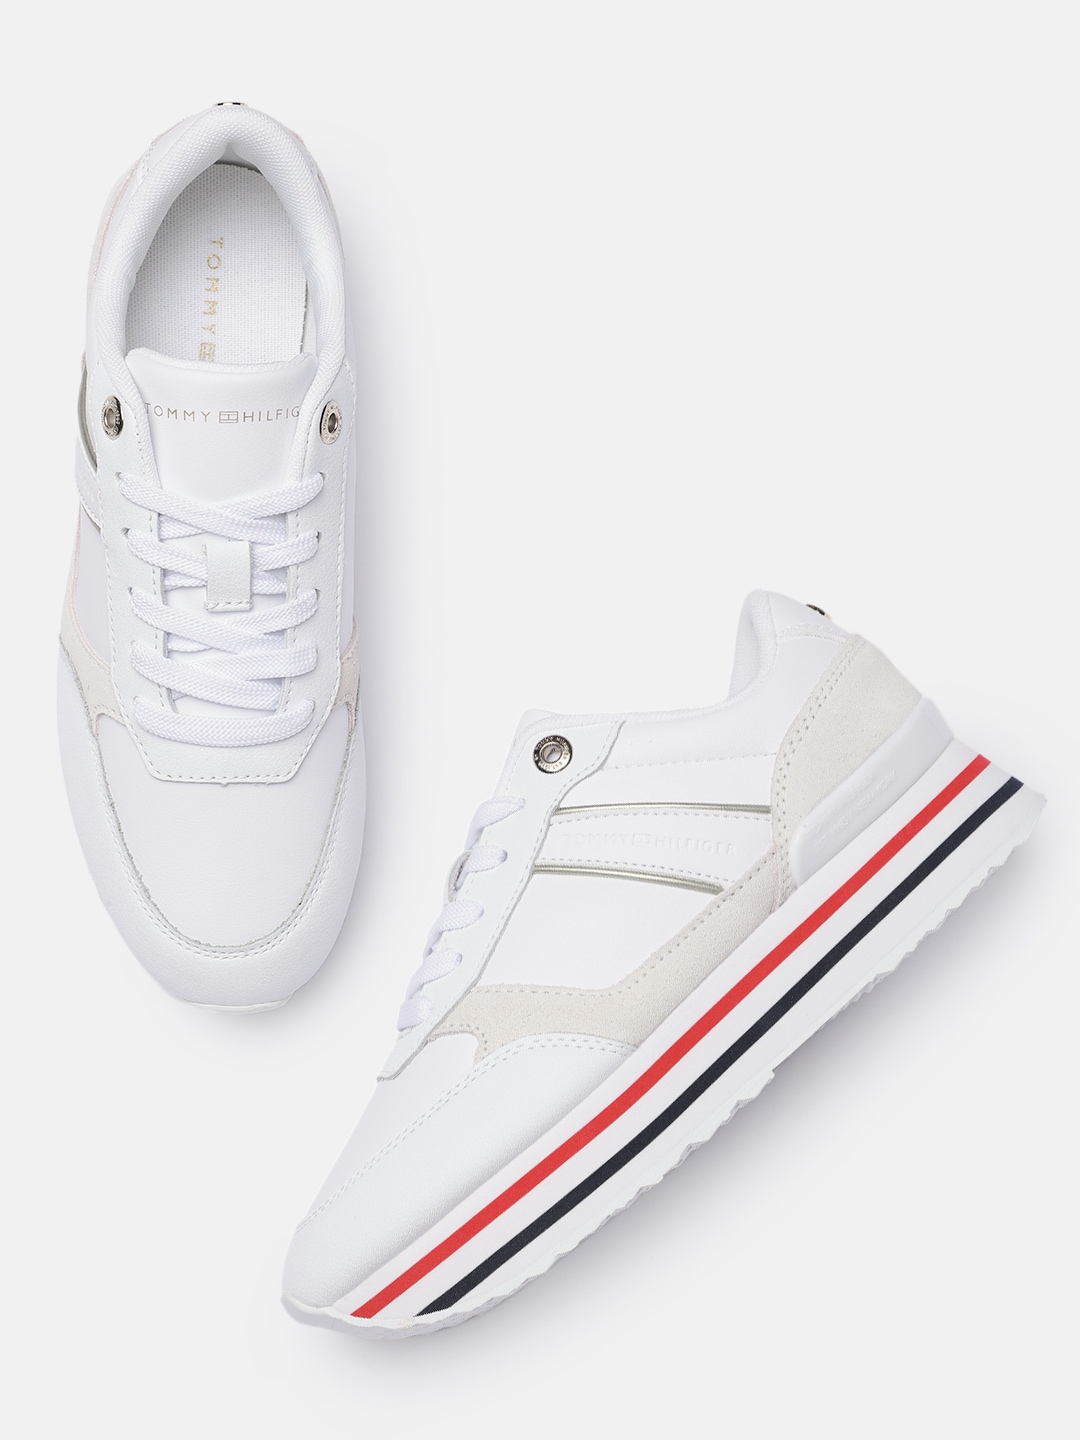 Tommy Hilfiger Women White Leather Platform Sneakers Price in India